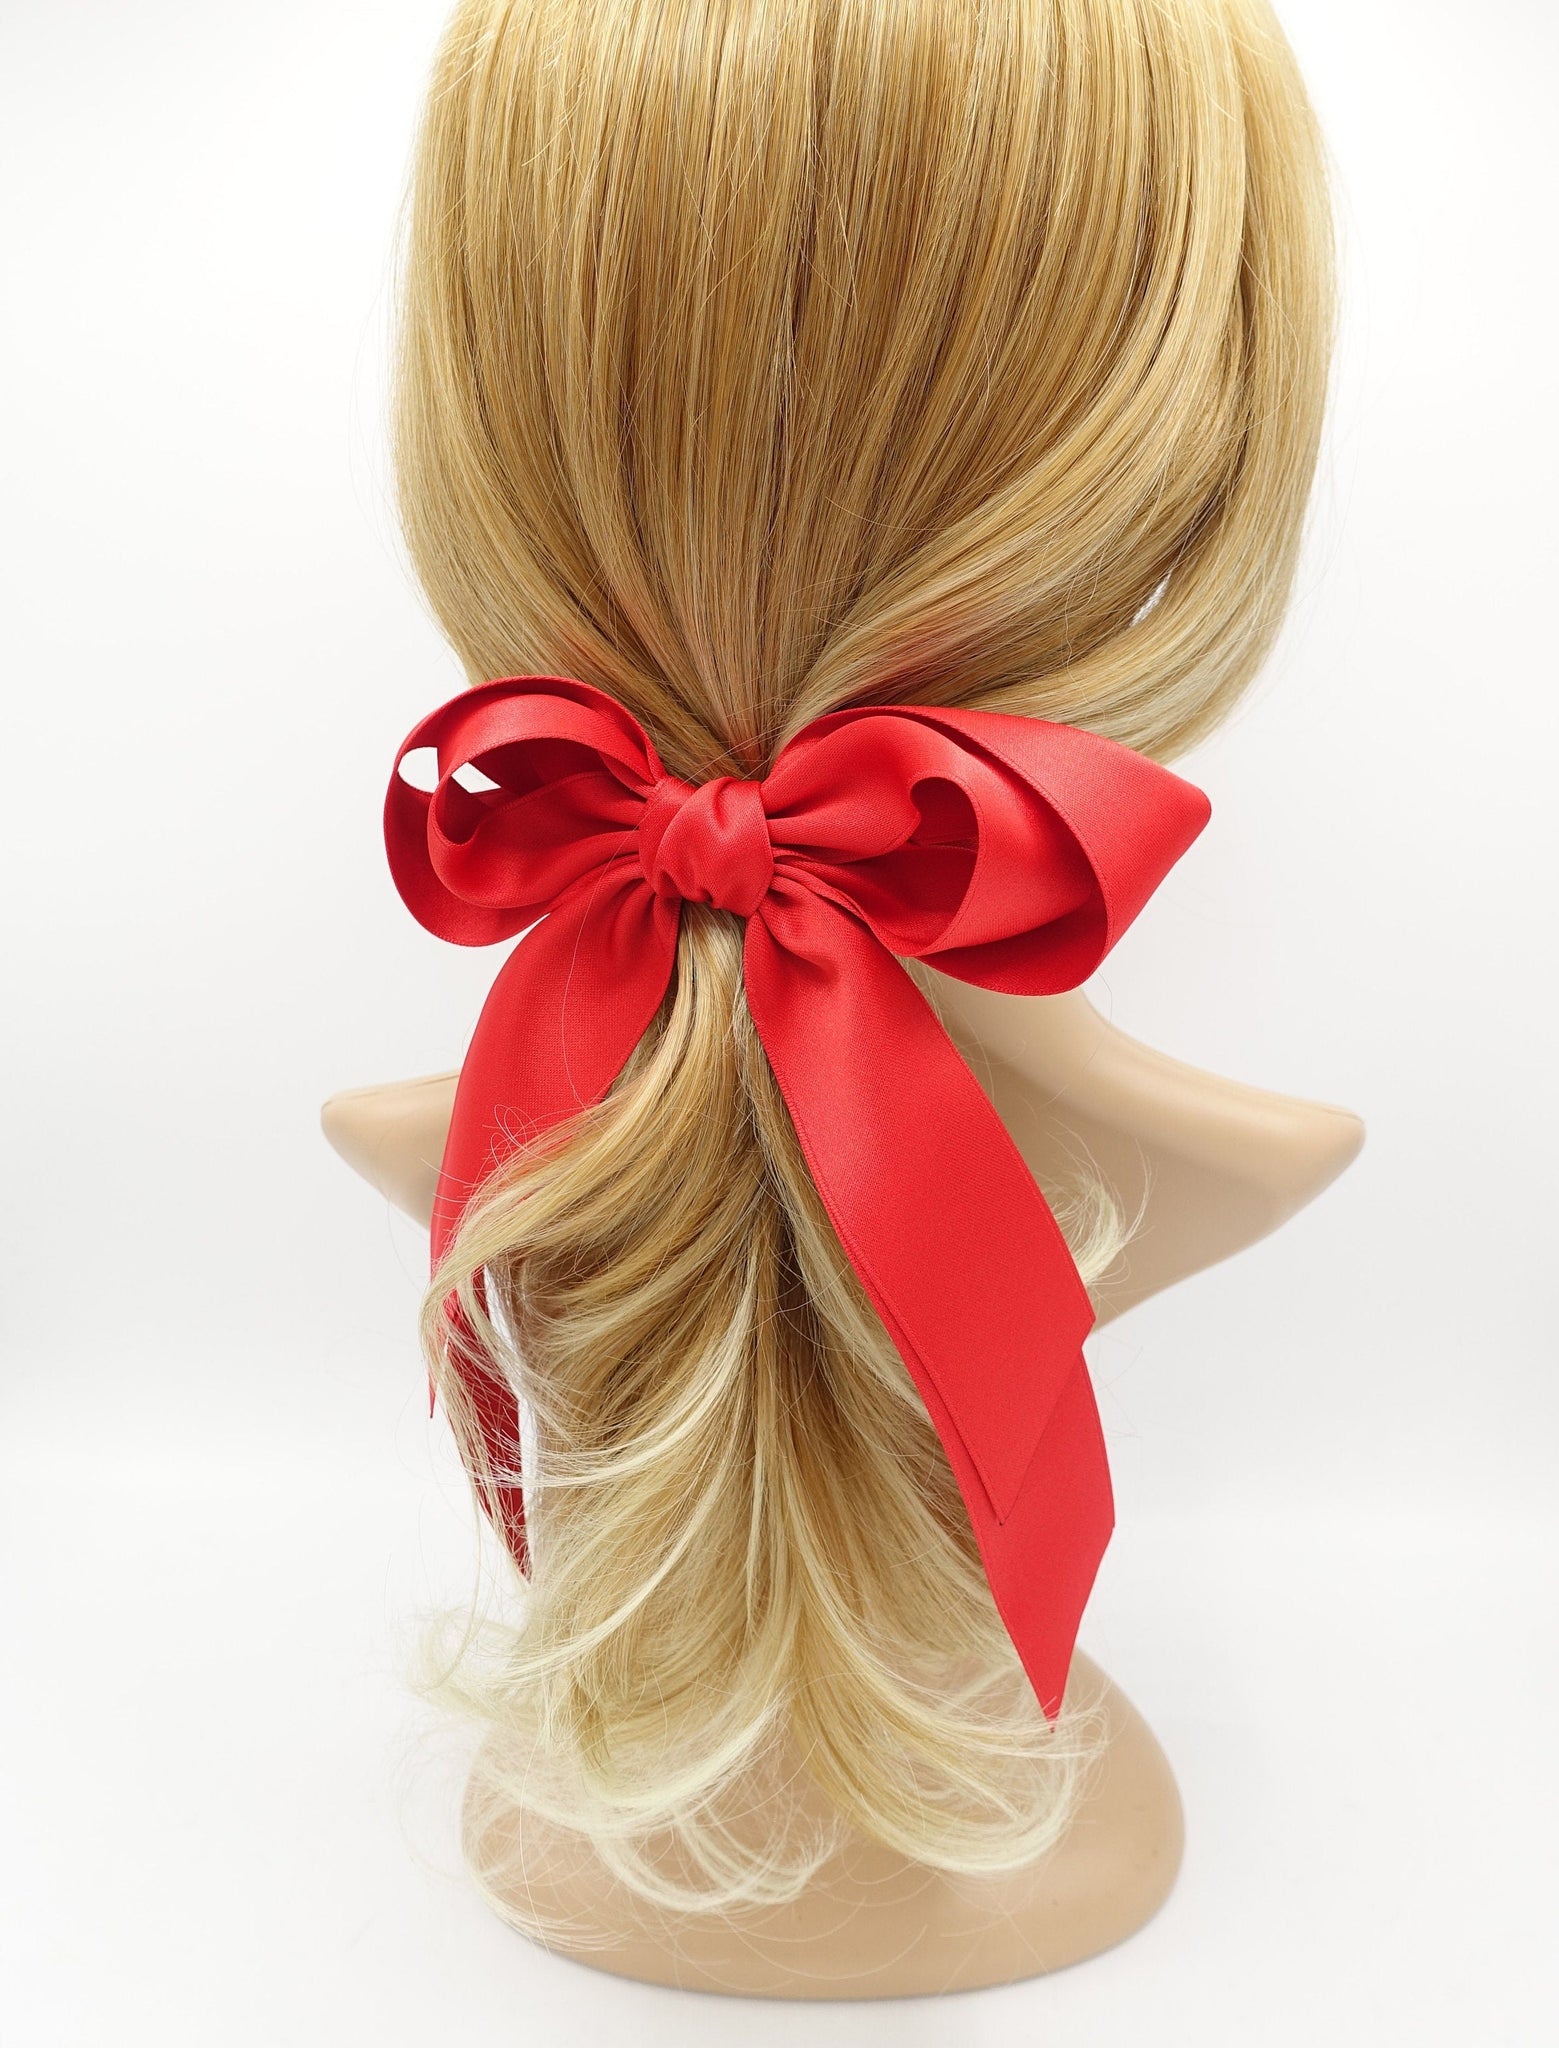 veryshine.com Barrette (Bow) Red satin layered double tail hair bow